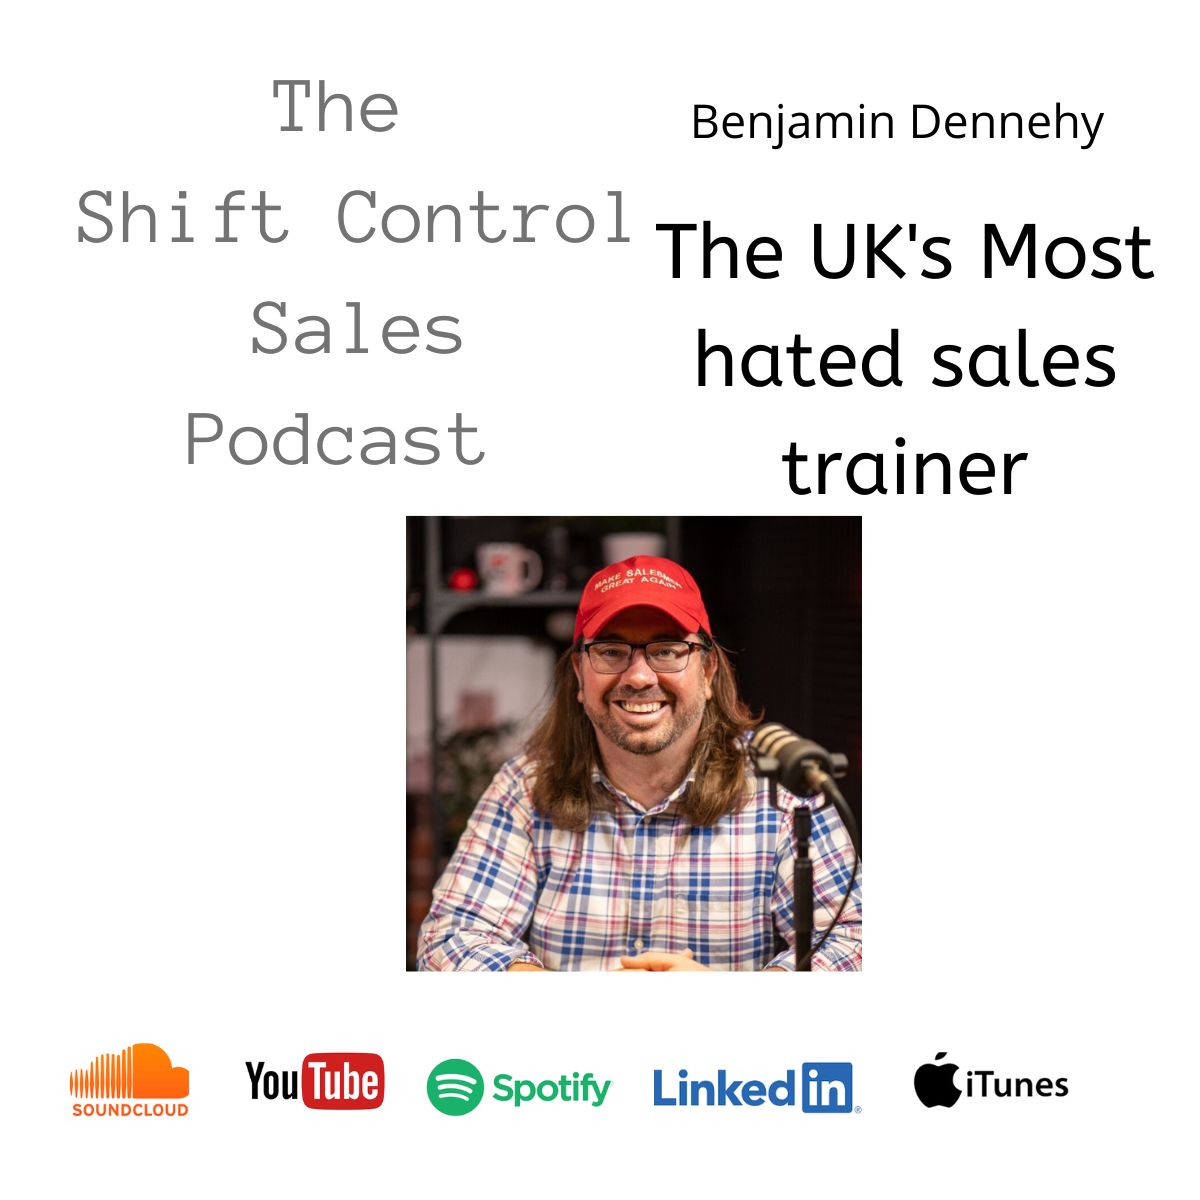 Episode 8: The UK’s most hated sales trainer